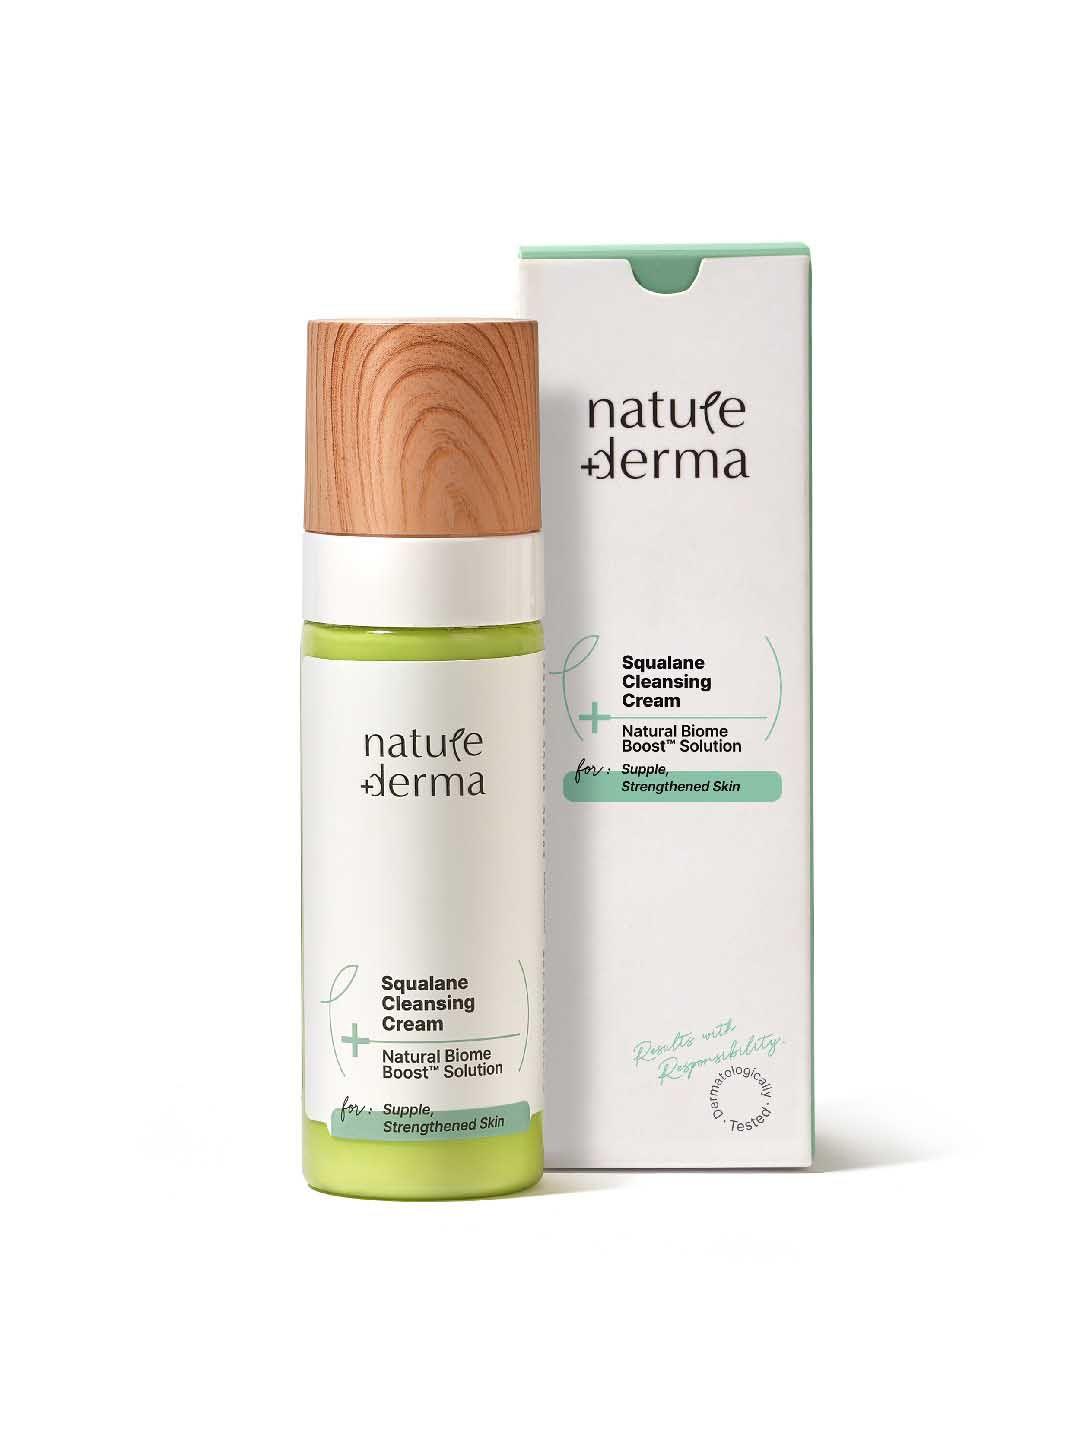 nature derma natural biome boost solution squalane cleansing cream - 50 ml